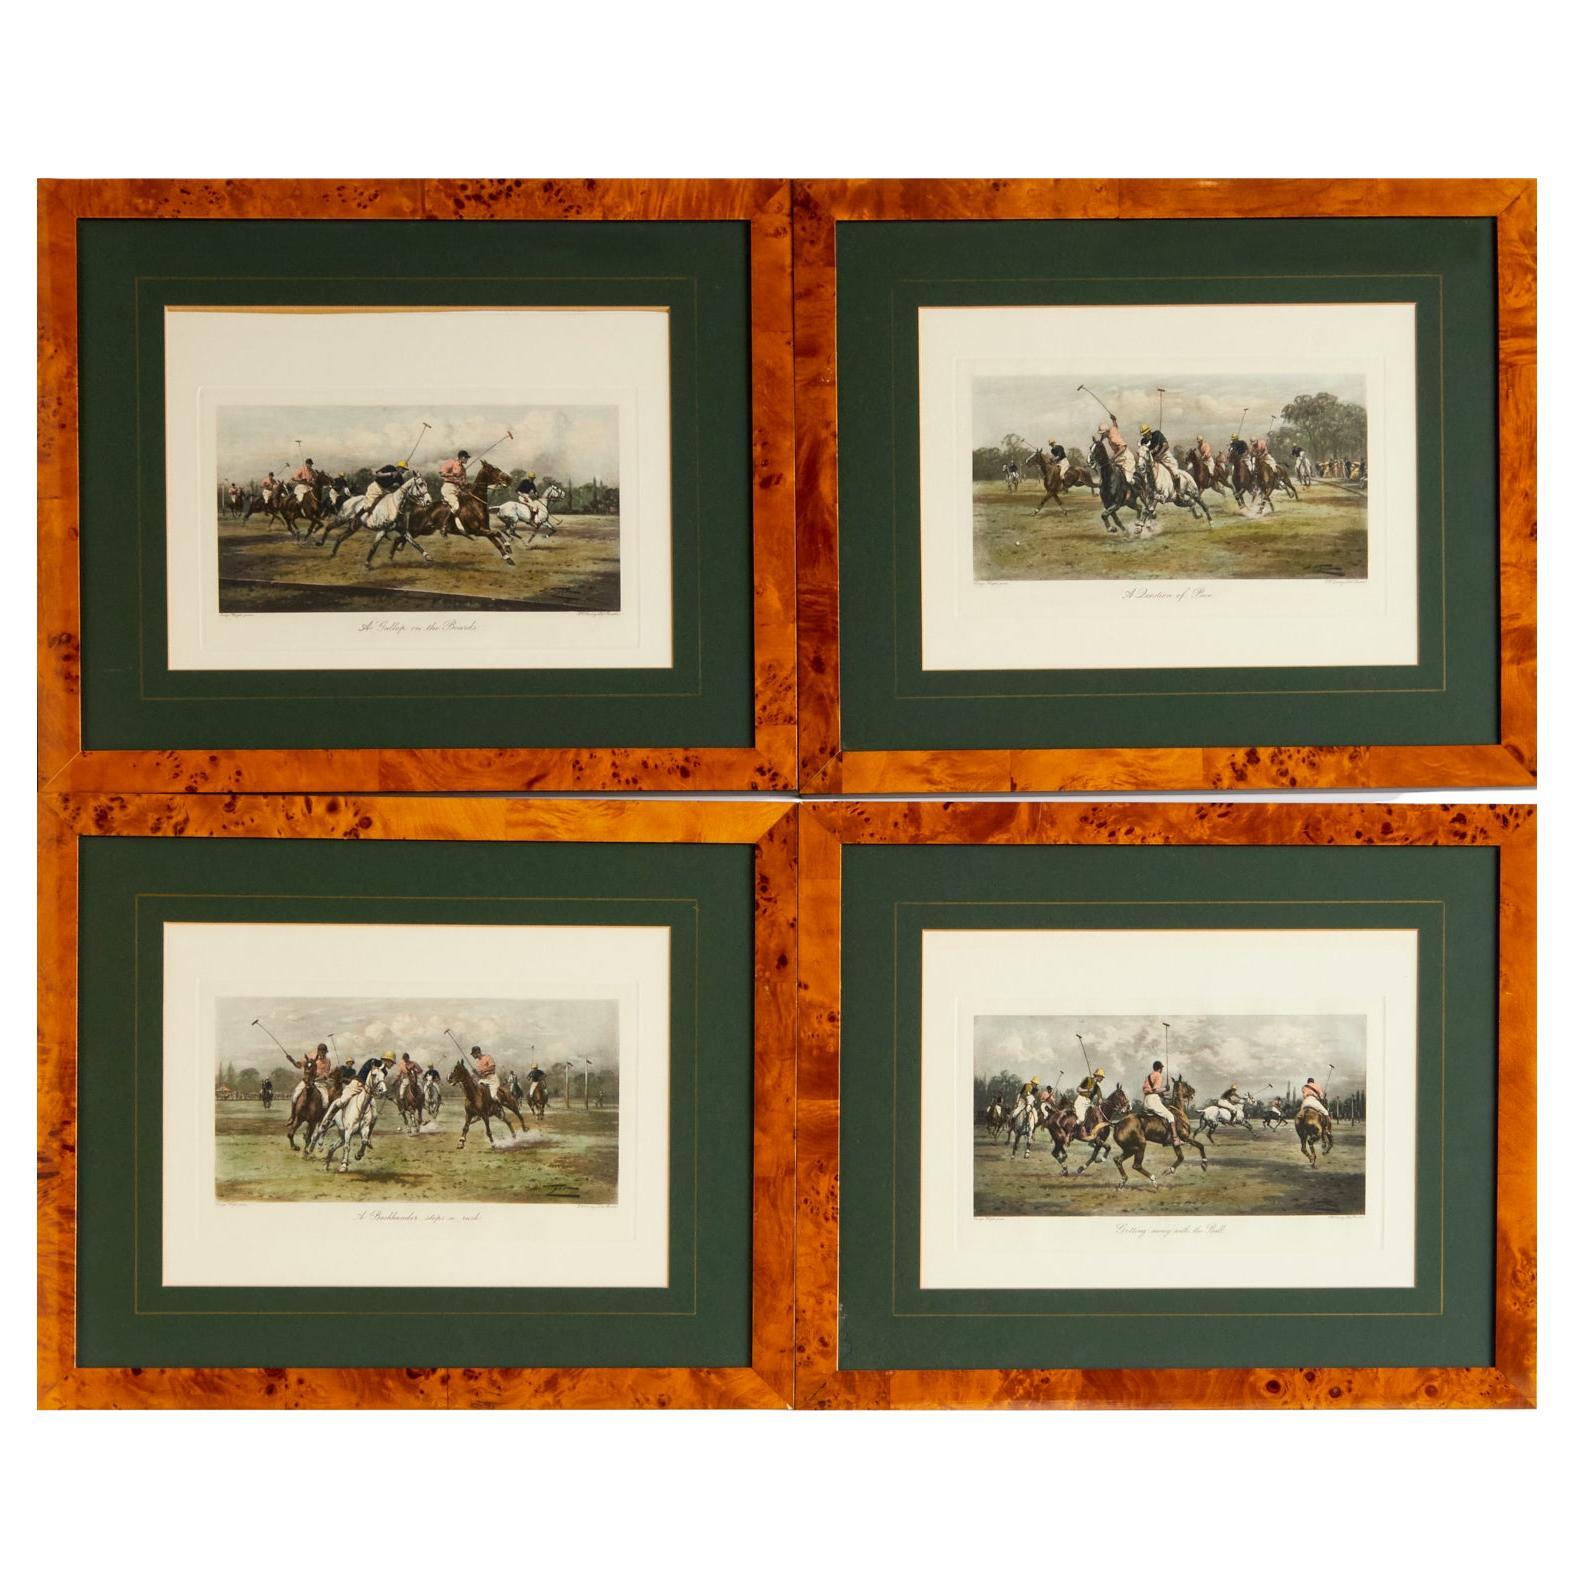 After George Wright Hand-Colored Polo Etchings E.W. Savory Ltd England Publisher